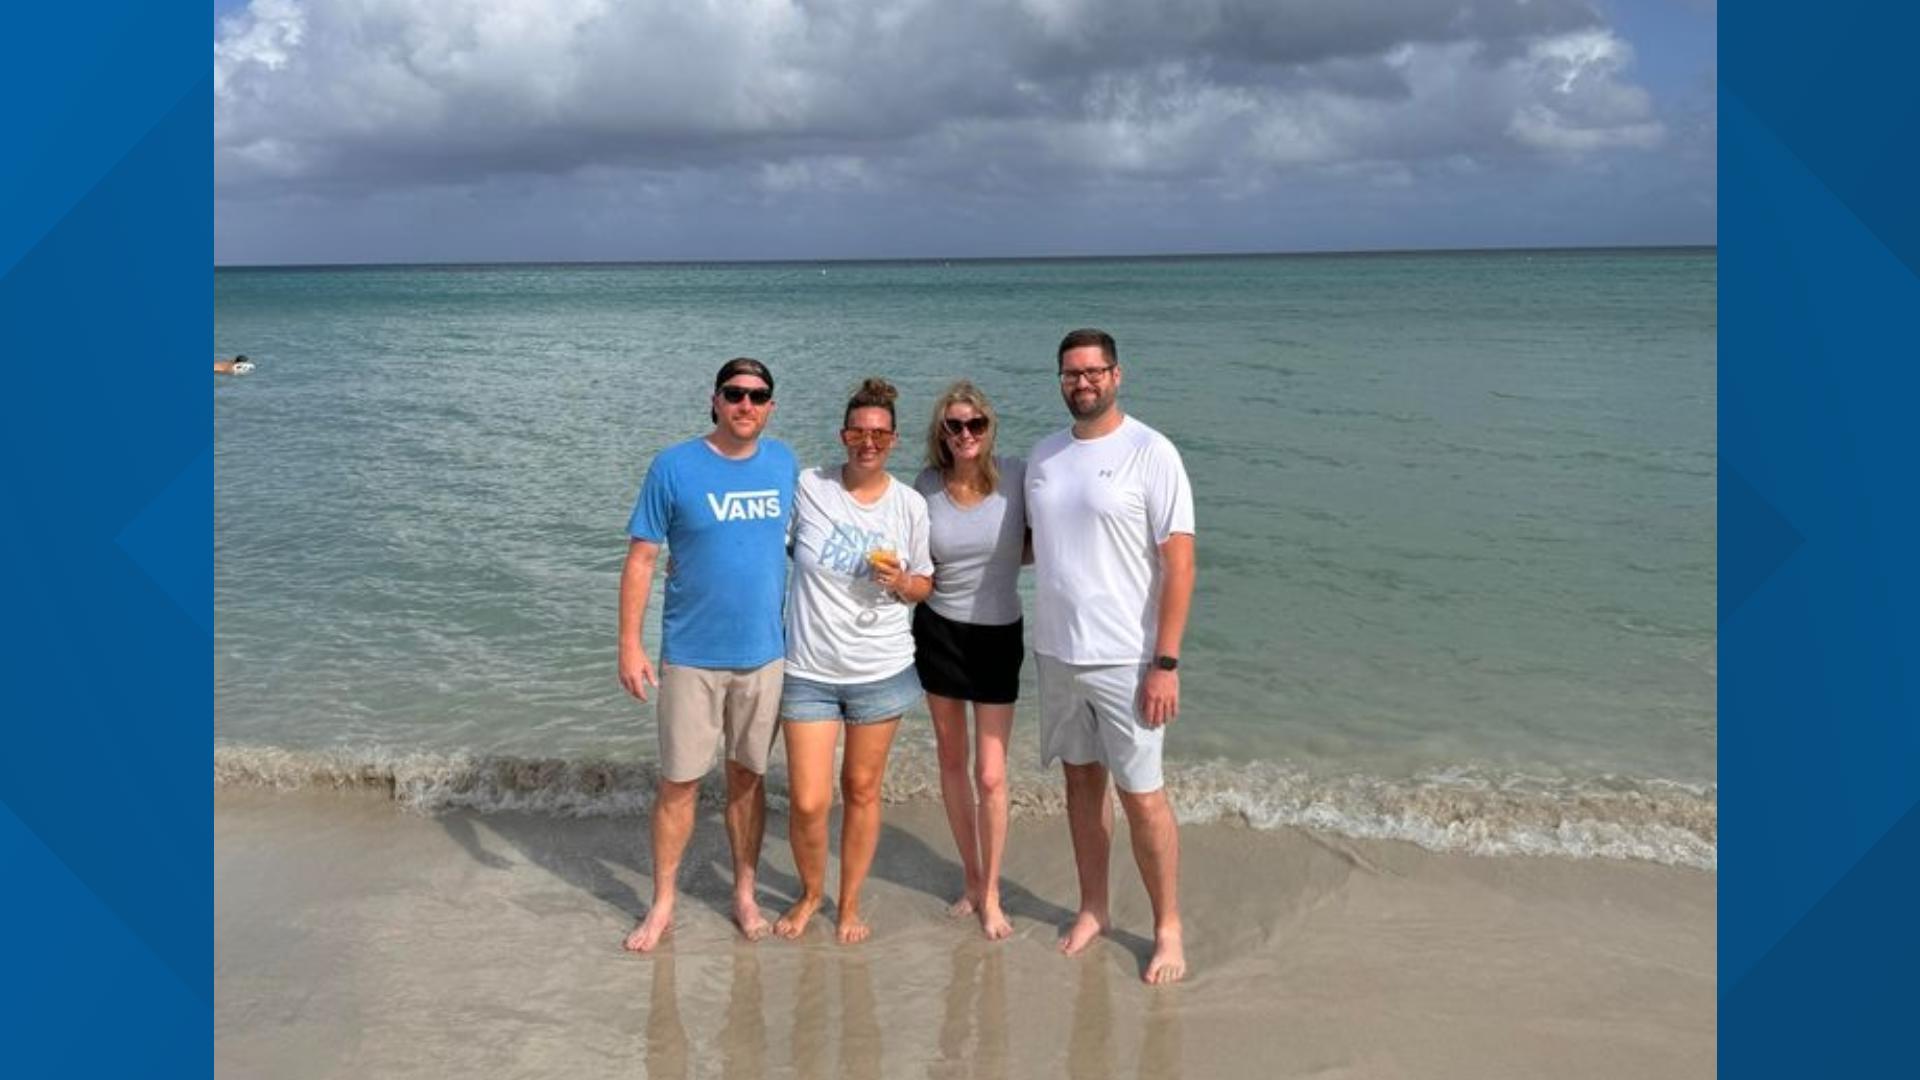 Lauren Souders and her husband were on vacation with another couple in Negril, Jamaica, when Hurricane Beryl hit.